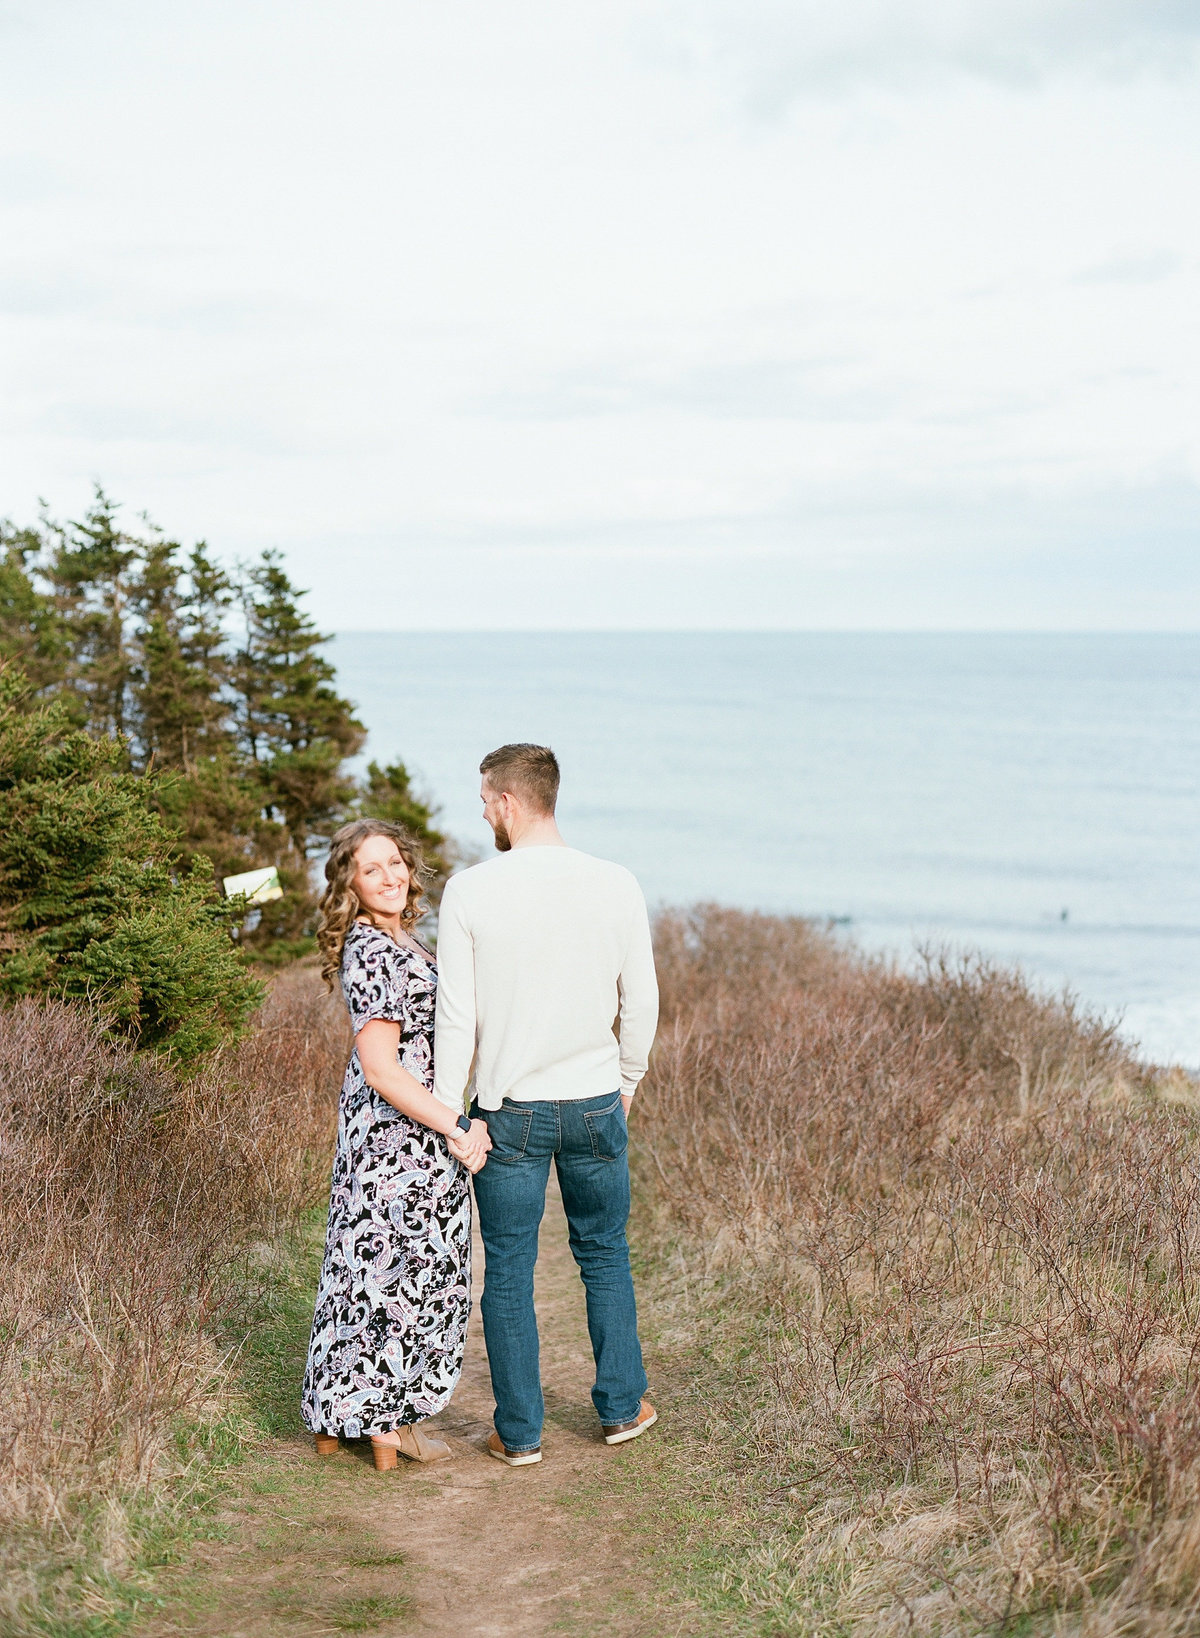 Jacqueline Anne Photography - Akayla and Andrew - Lawrencetown Beach-56